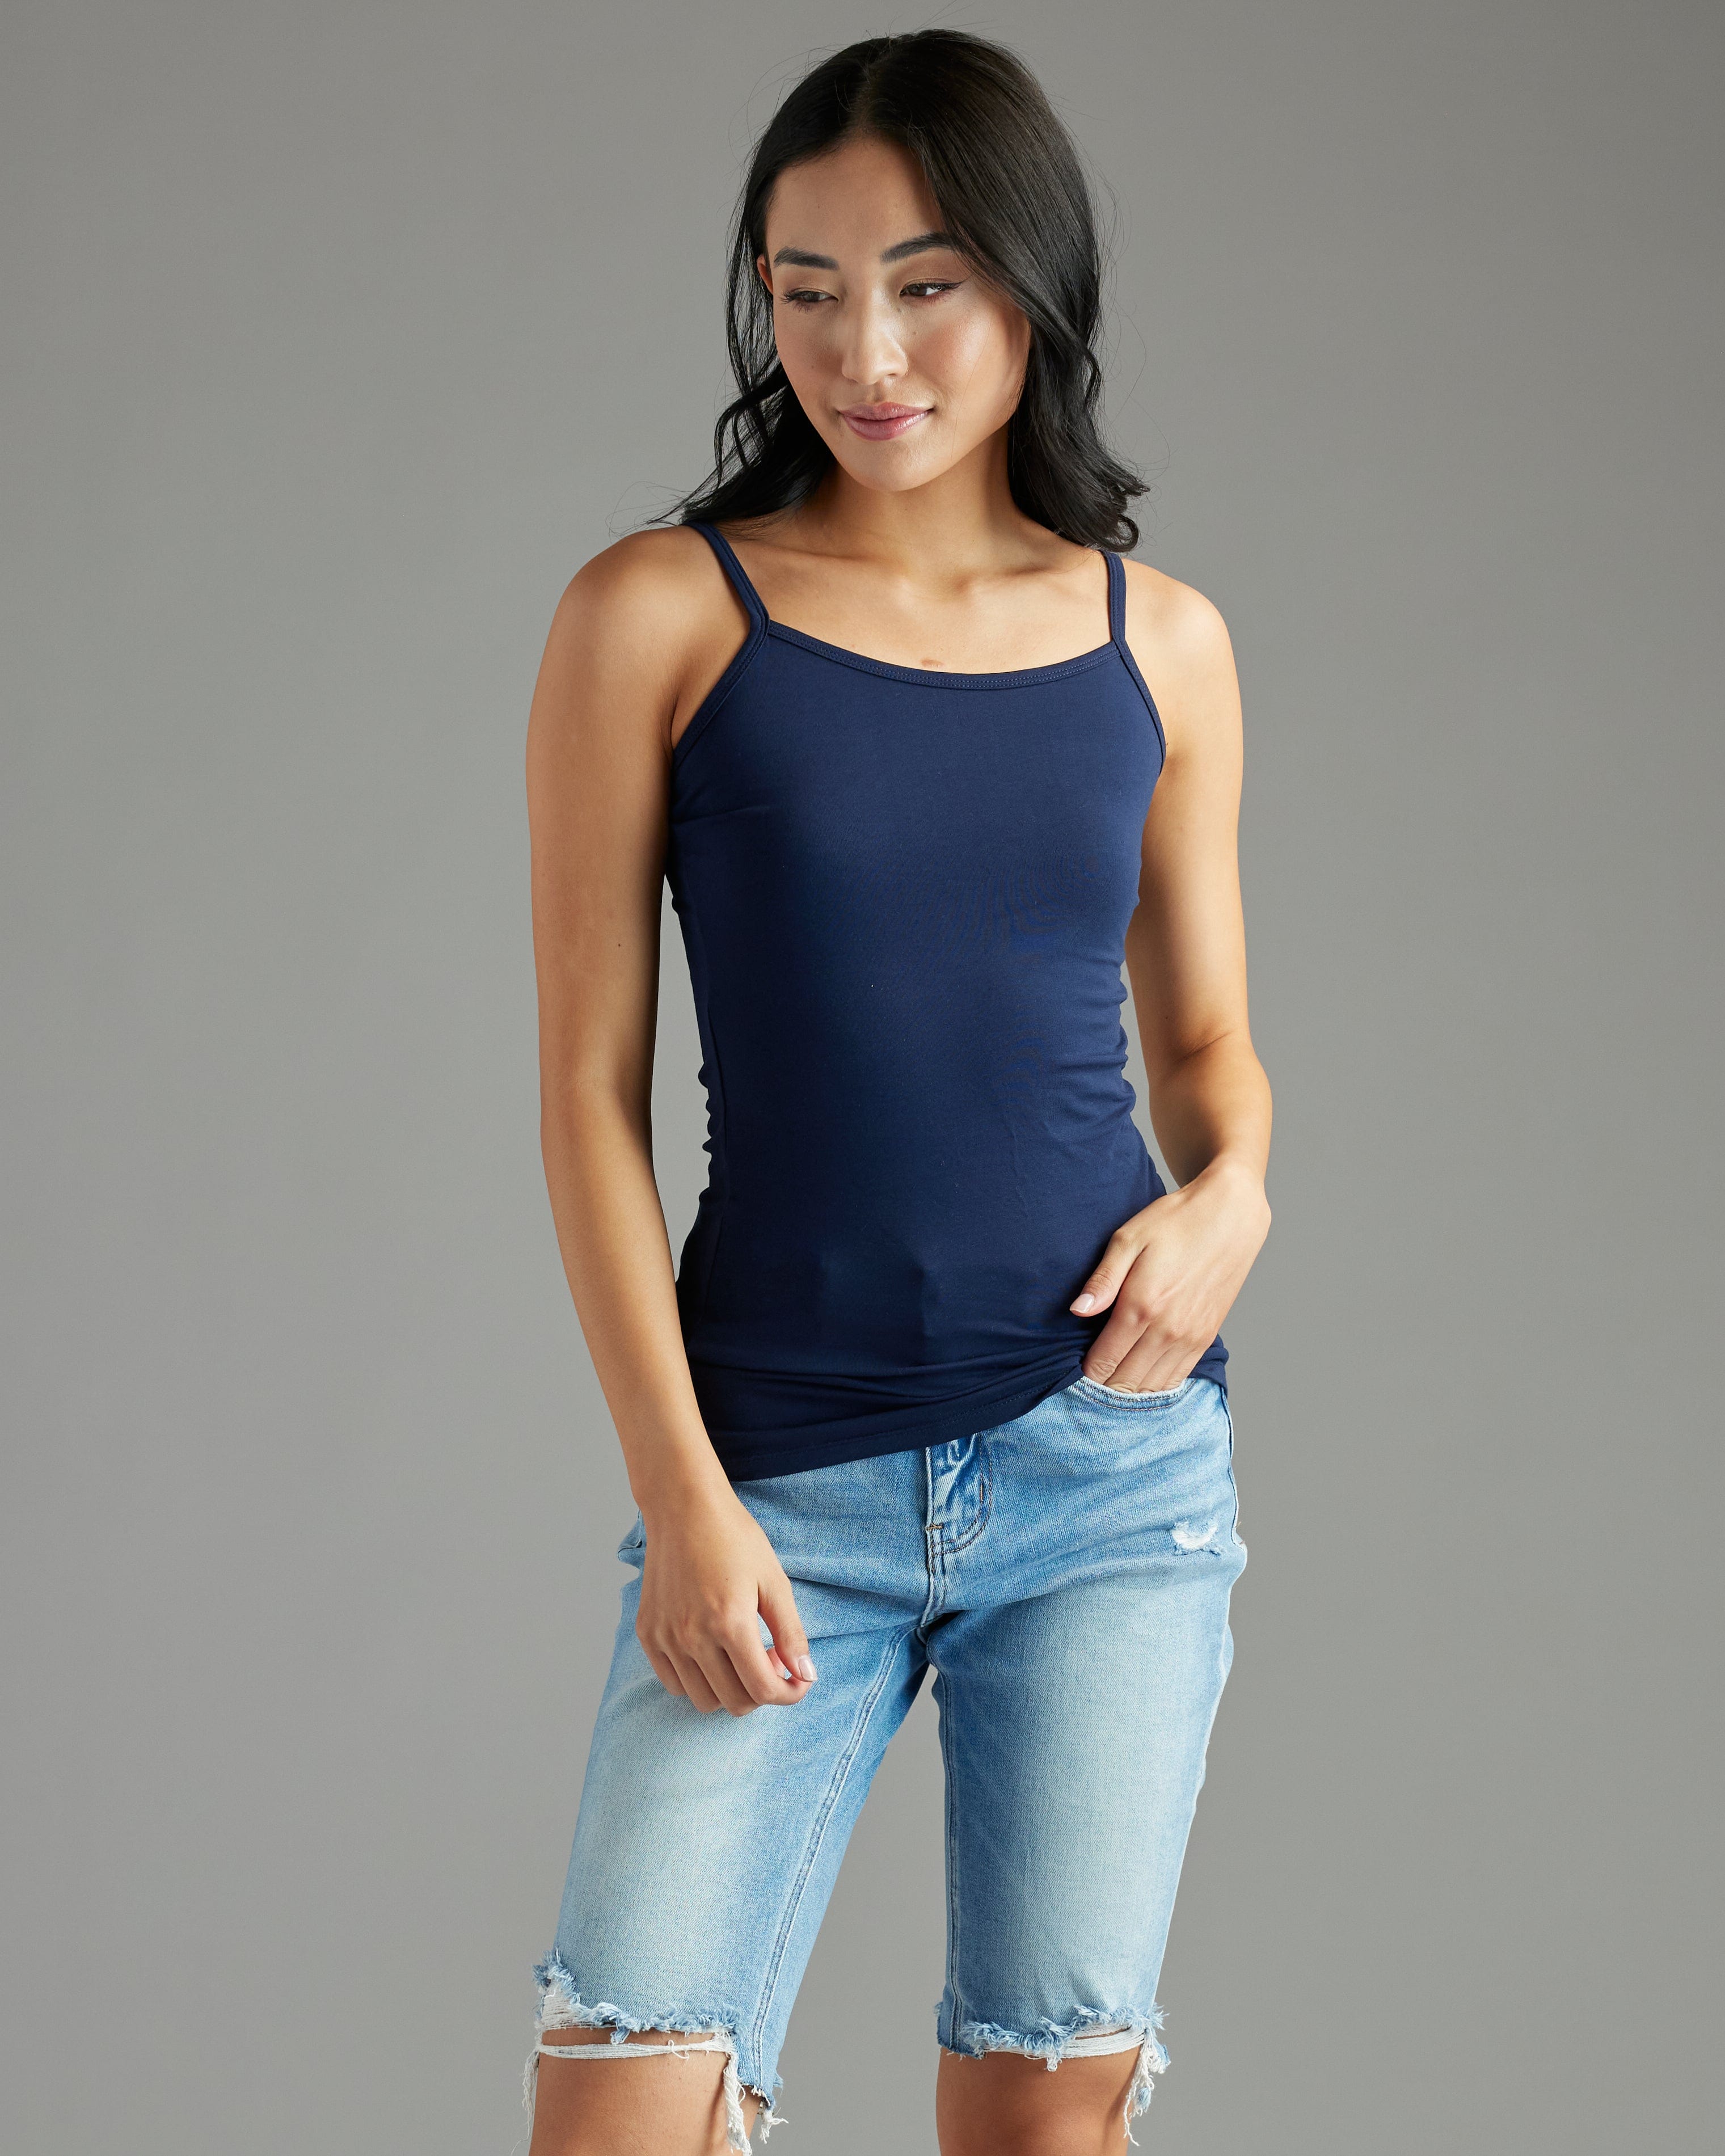 Woman in basic, fitted, cami